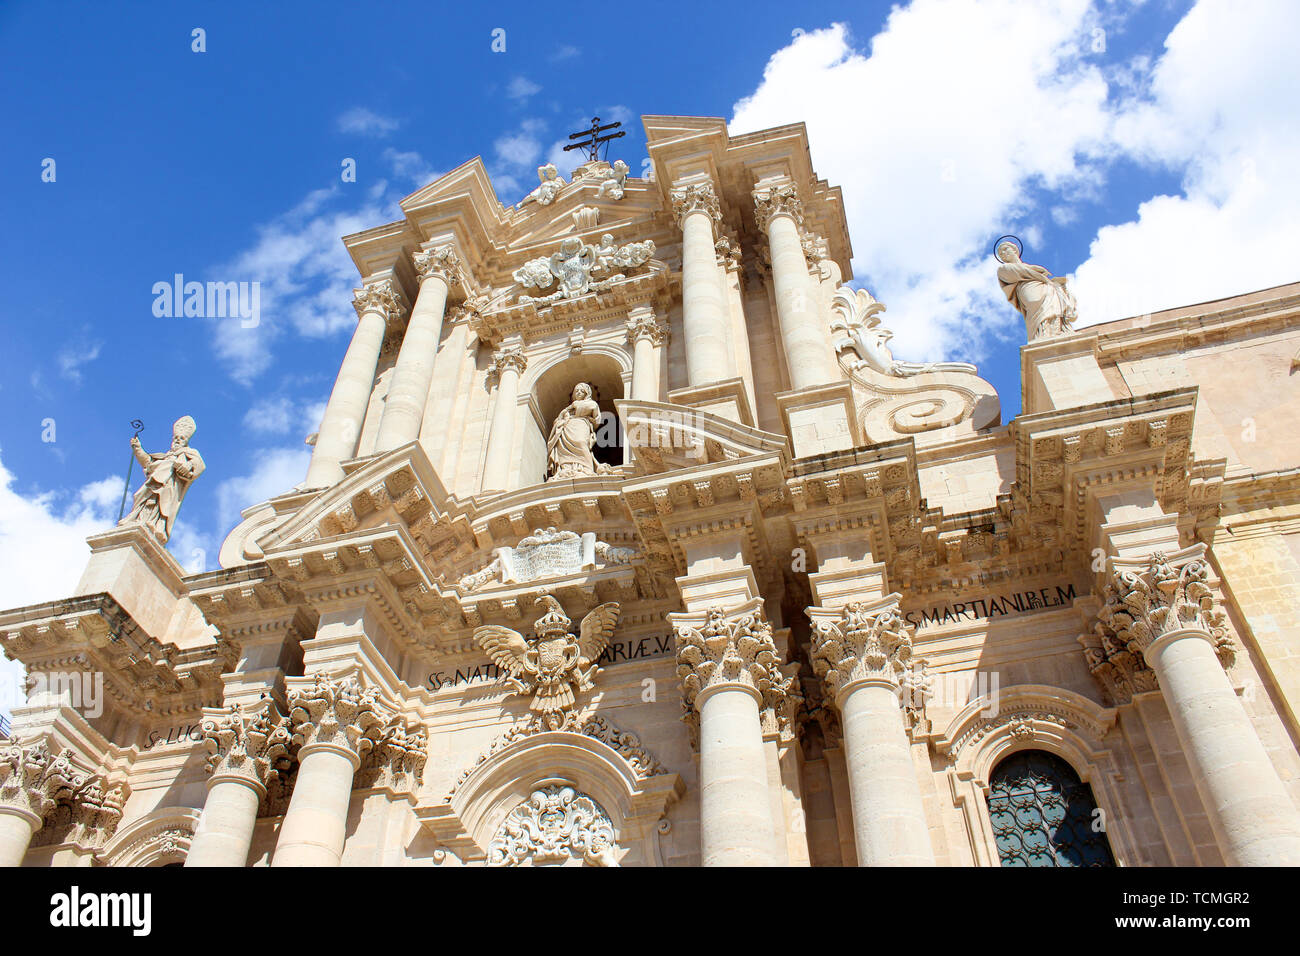 Amazing Roman Catholic Cathedral of Syracuse in Sicily, Italy photographed from below against blue sky. The church is part of UNESCO World Heritage. Popular tourist attraction. Stock Photo